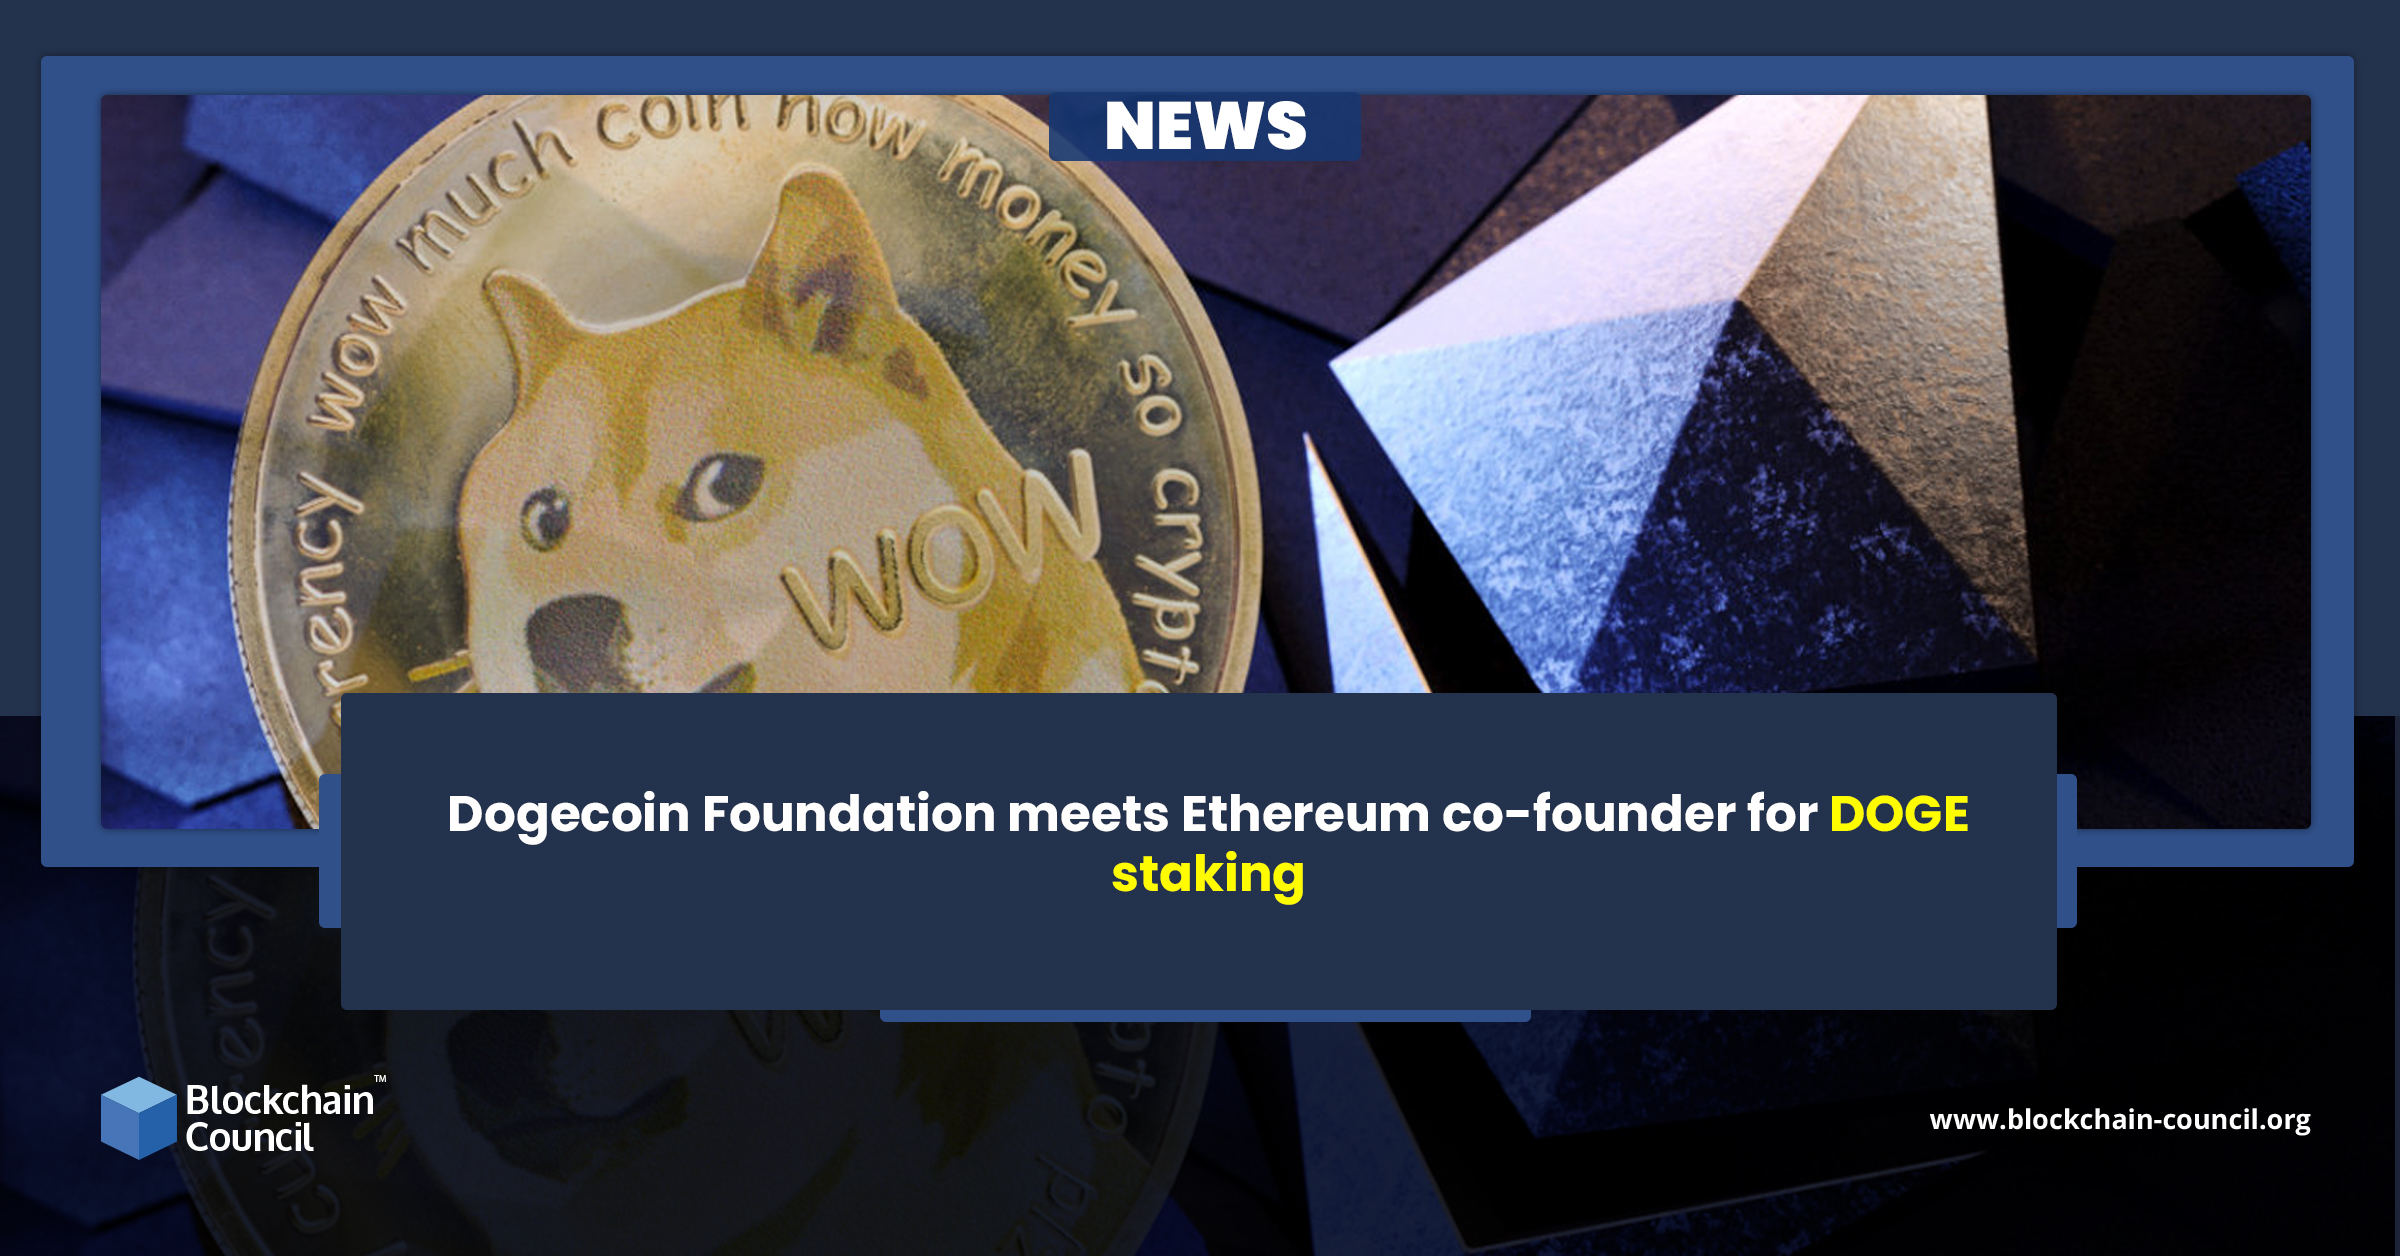 Dogecoin Foundation meets Ethereum co-founder for DOGE staking